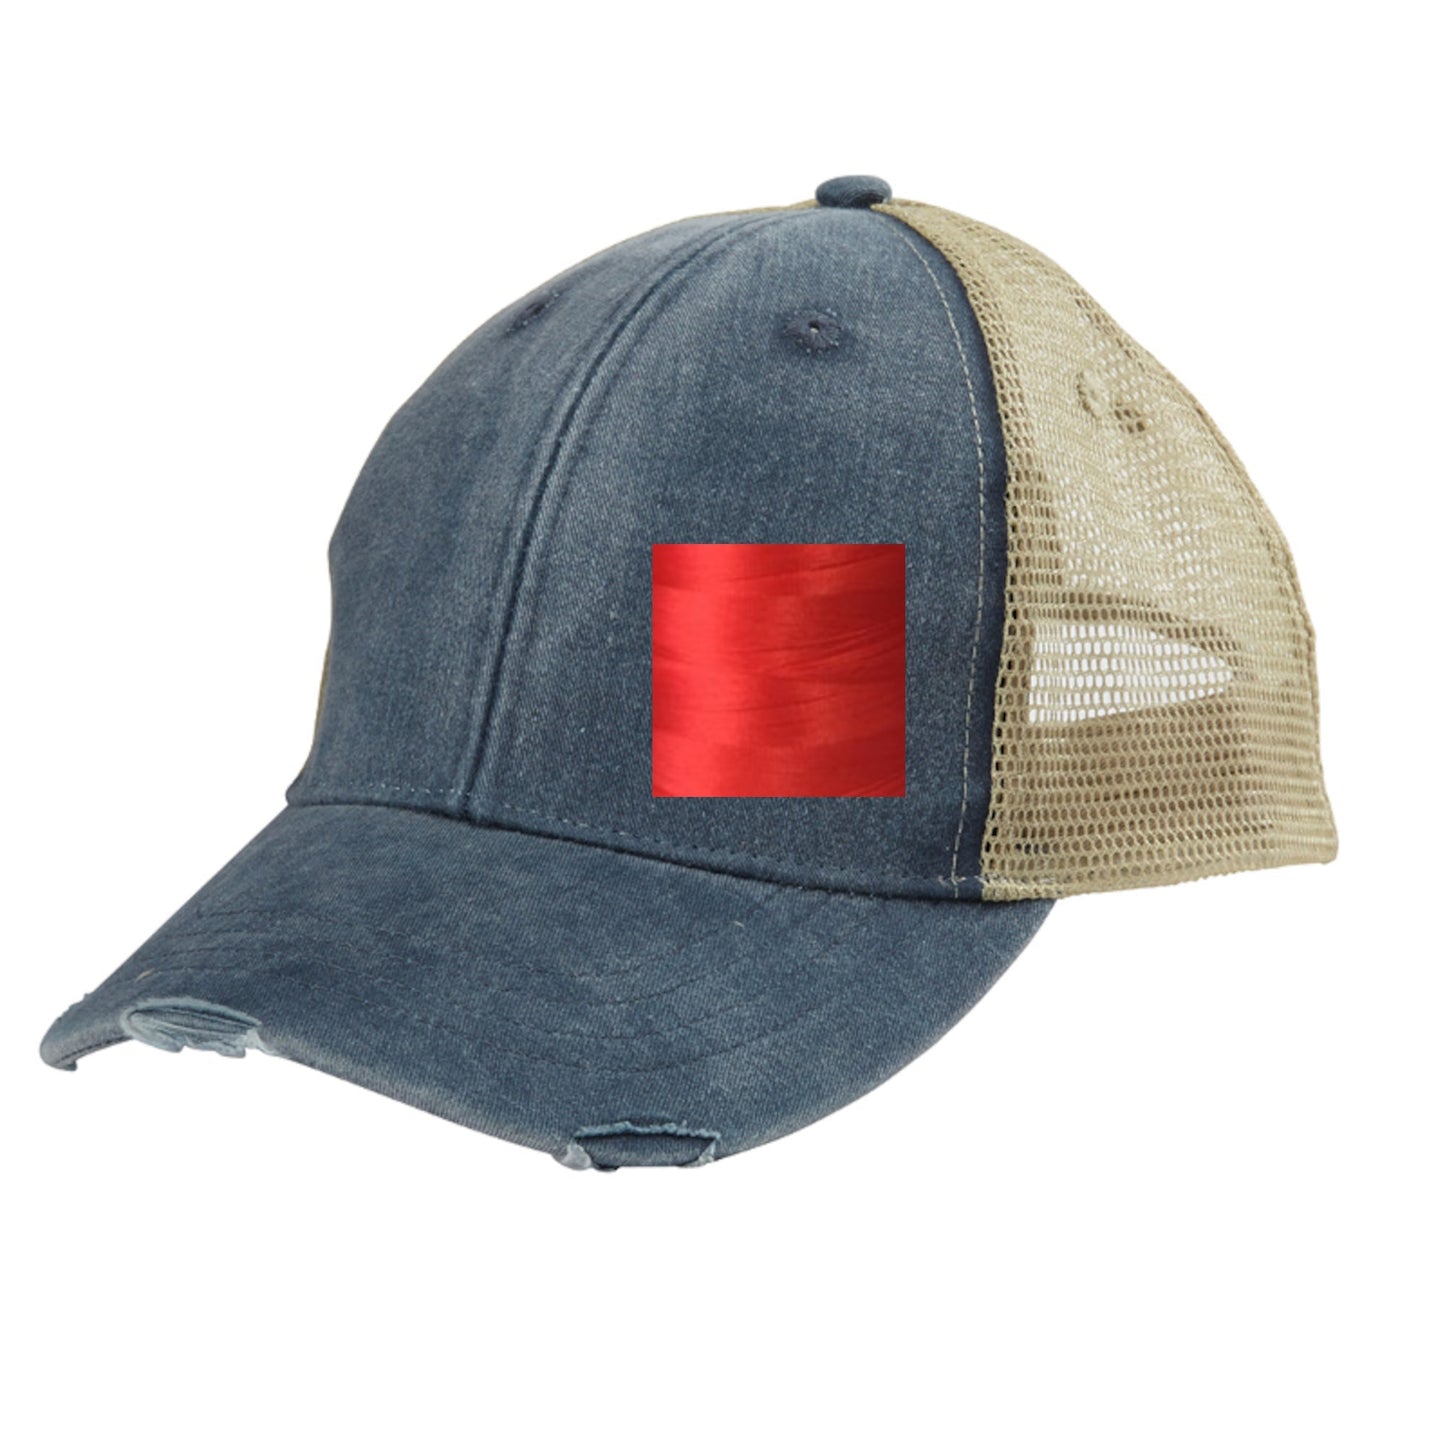 Virginia Hat | Distressed Snapback Trucker | state cap | many color choices